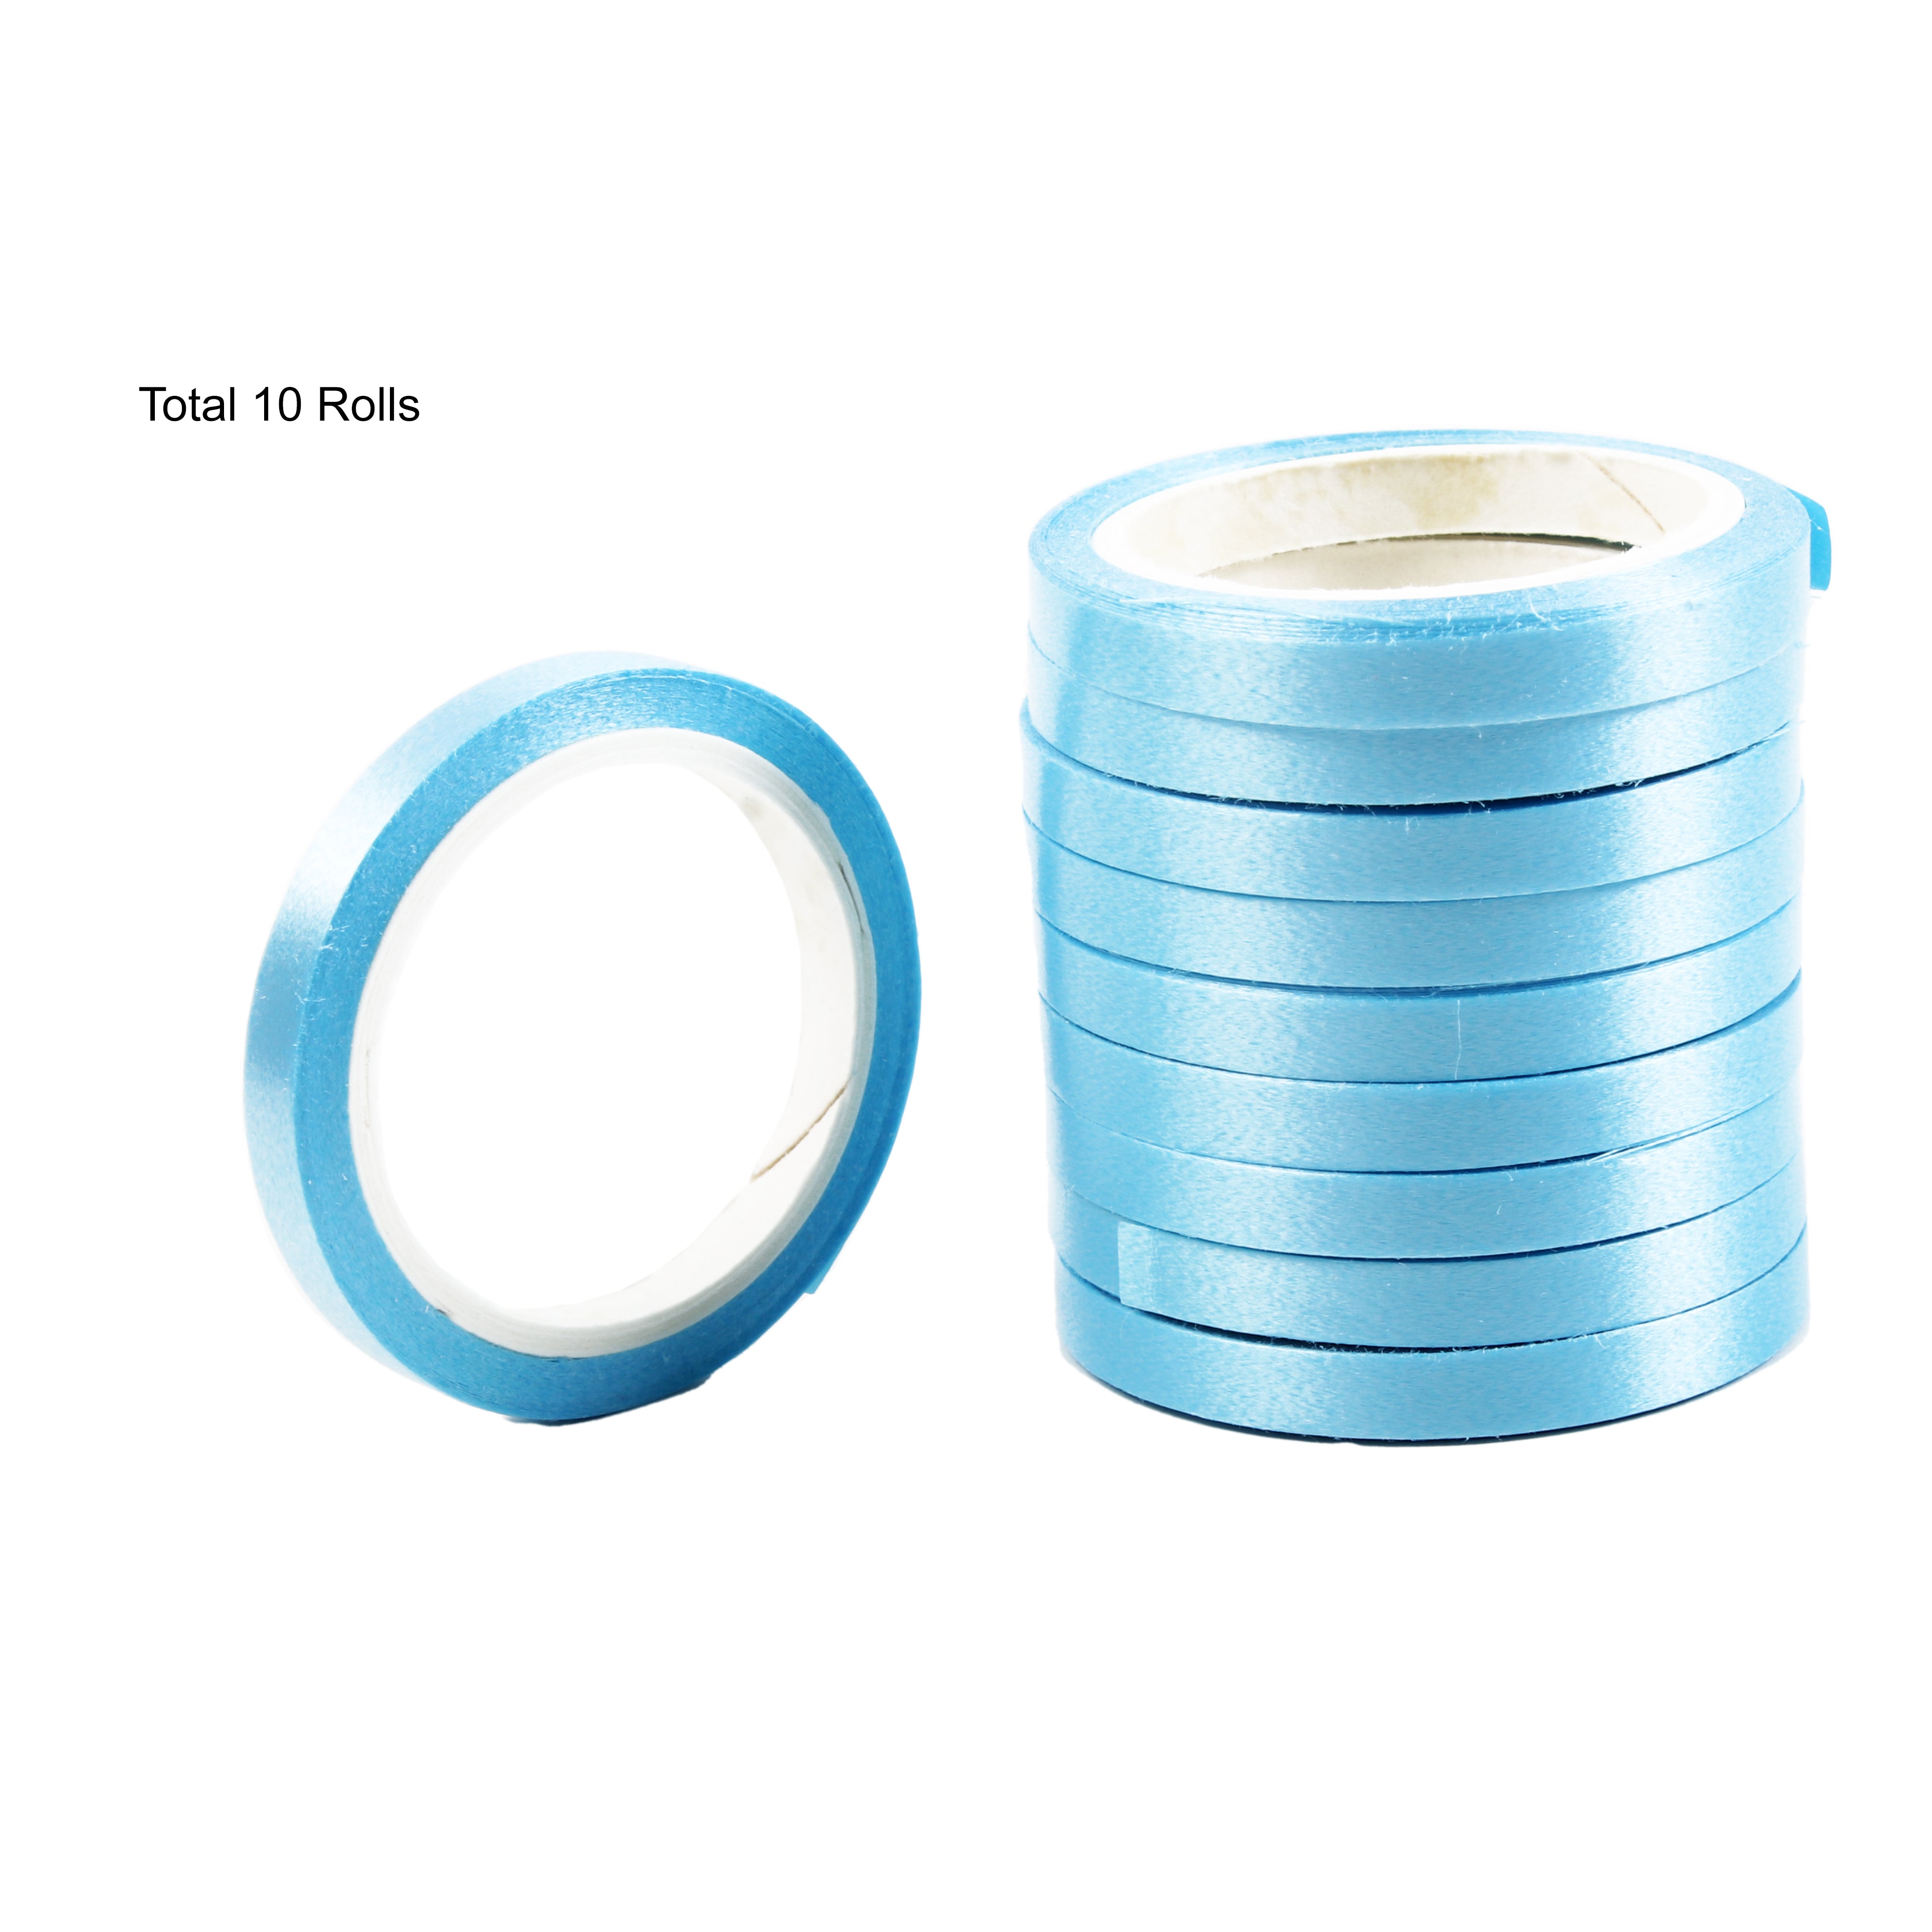 Curling Ribbon For Balloon Decoration 3mm X 3mtr Sky Blue 10pc